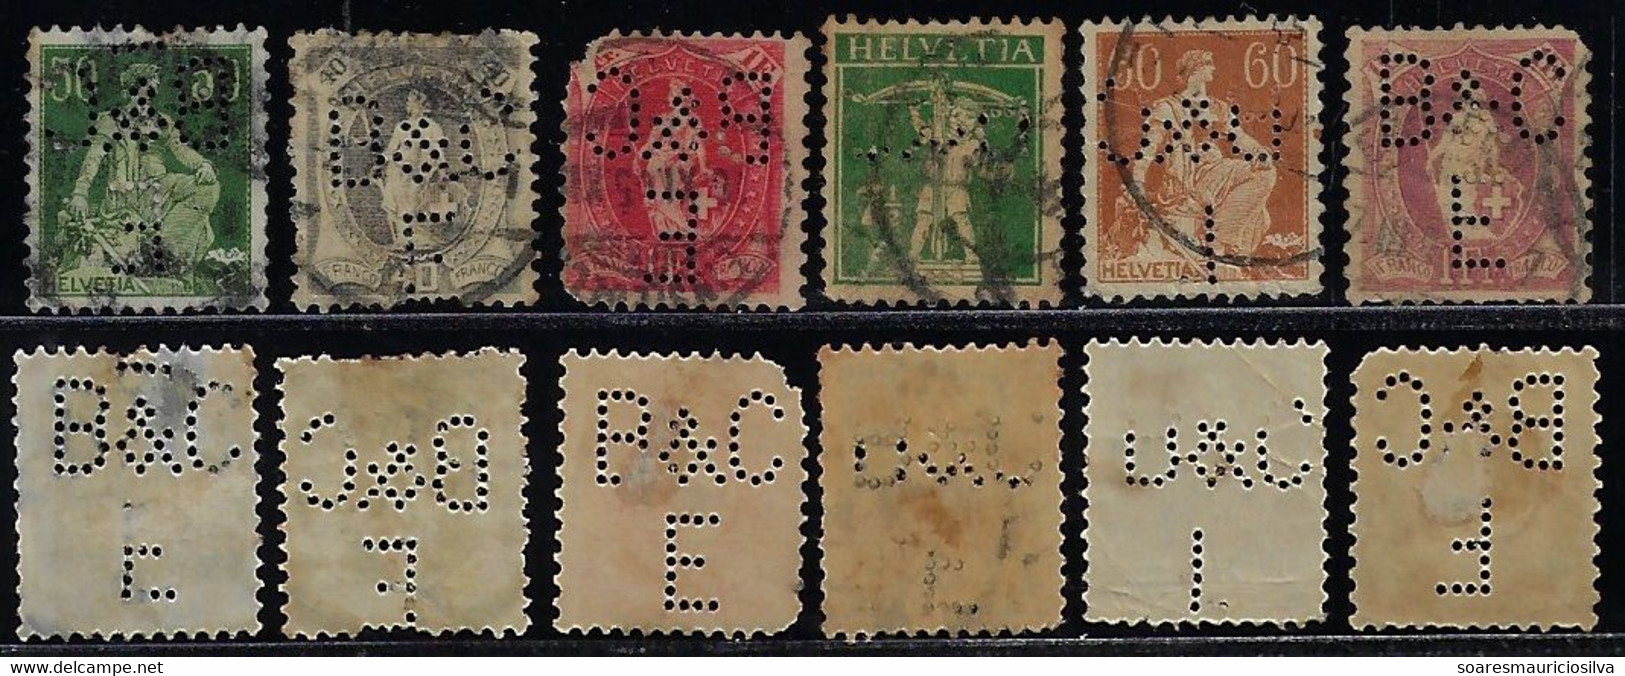 Switzerland 1886 / 1947 6 Stamp With Perfin B&C/E By Benziger & Co AG Publishing House From Einsiedeln Lochung Perfore - Perfin